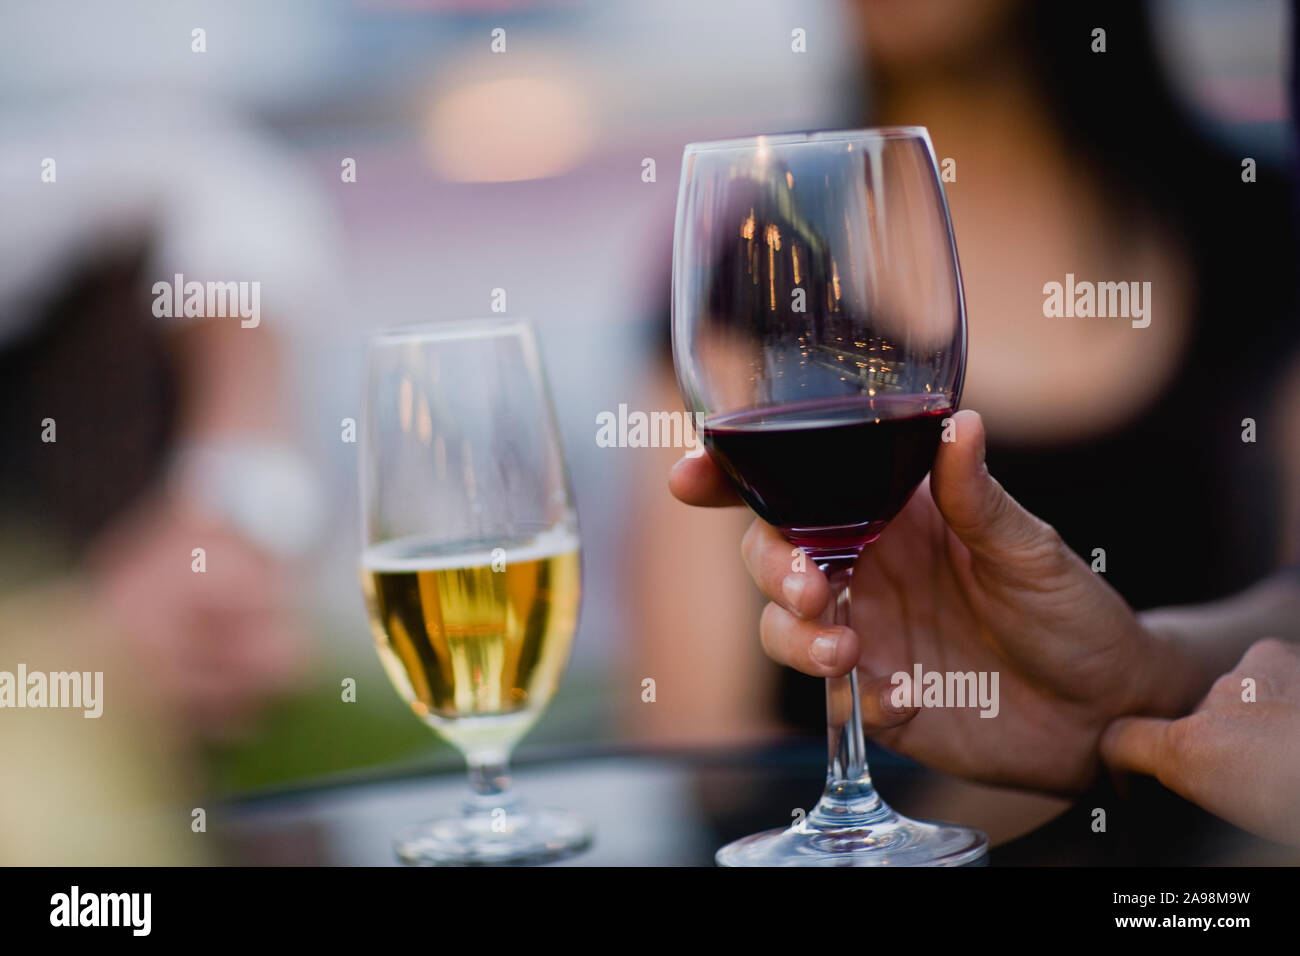 Hand holding a glass of red wine on a table next to a glass of beer. Stock Photo